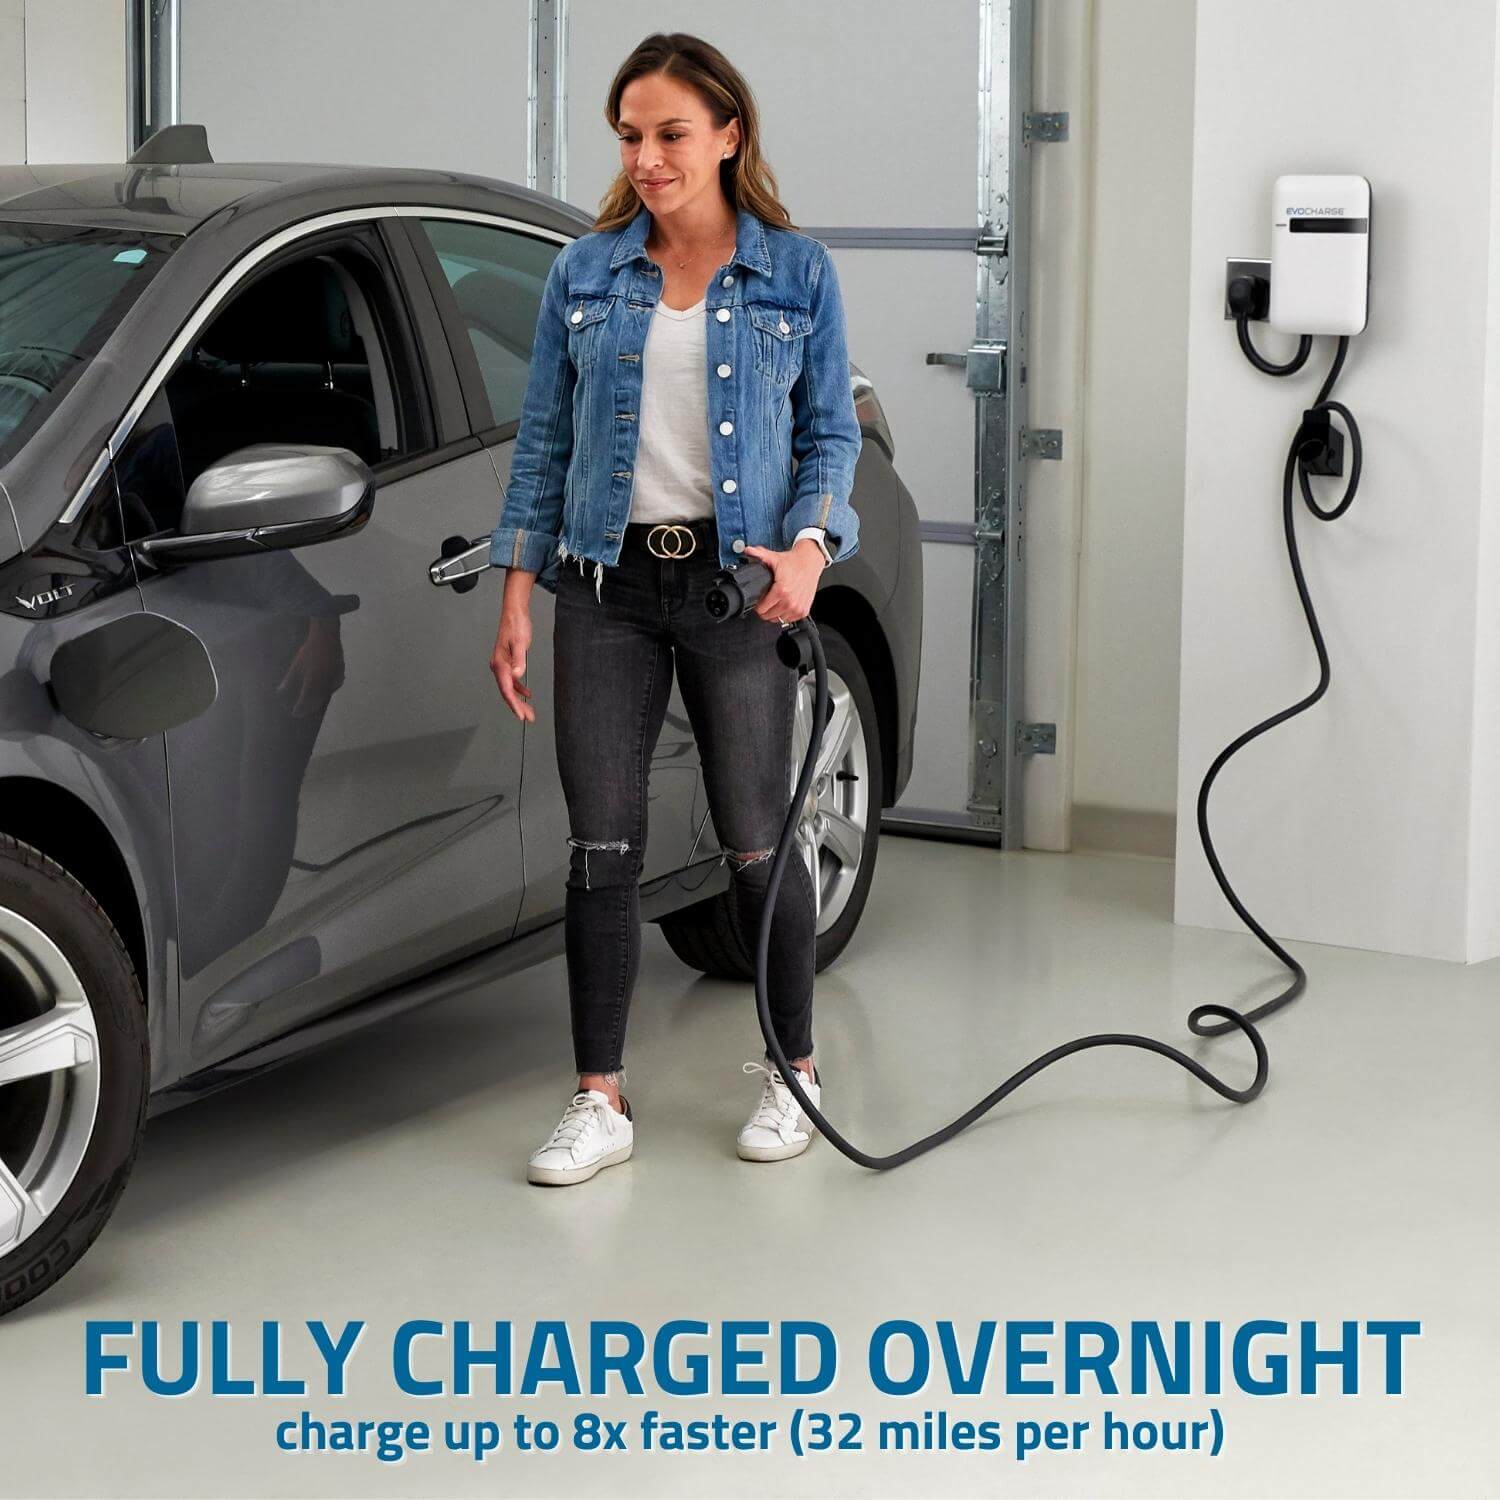 How do you pay to charge an electric car?